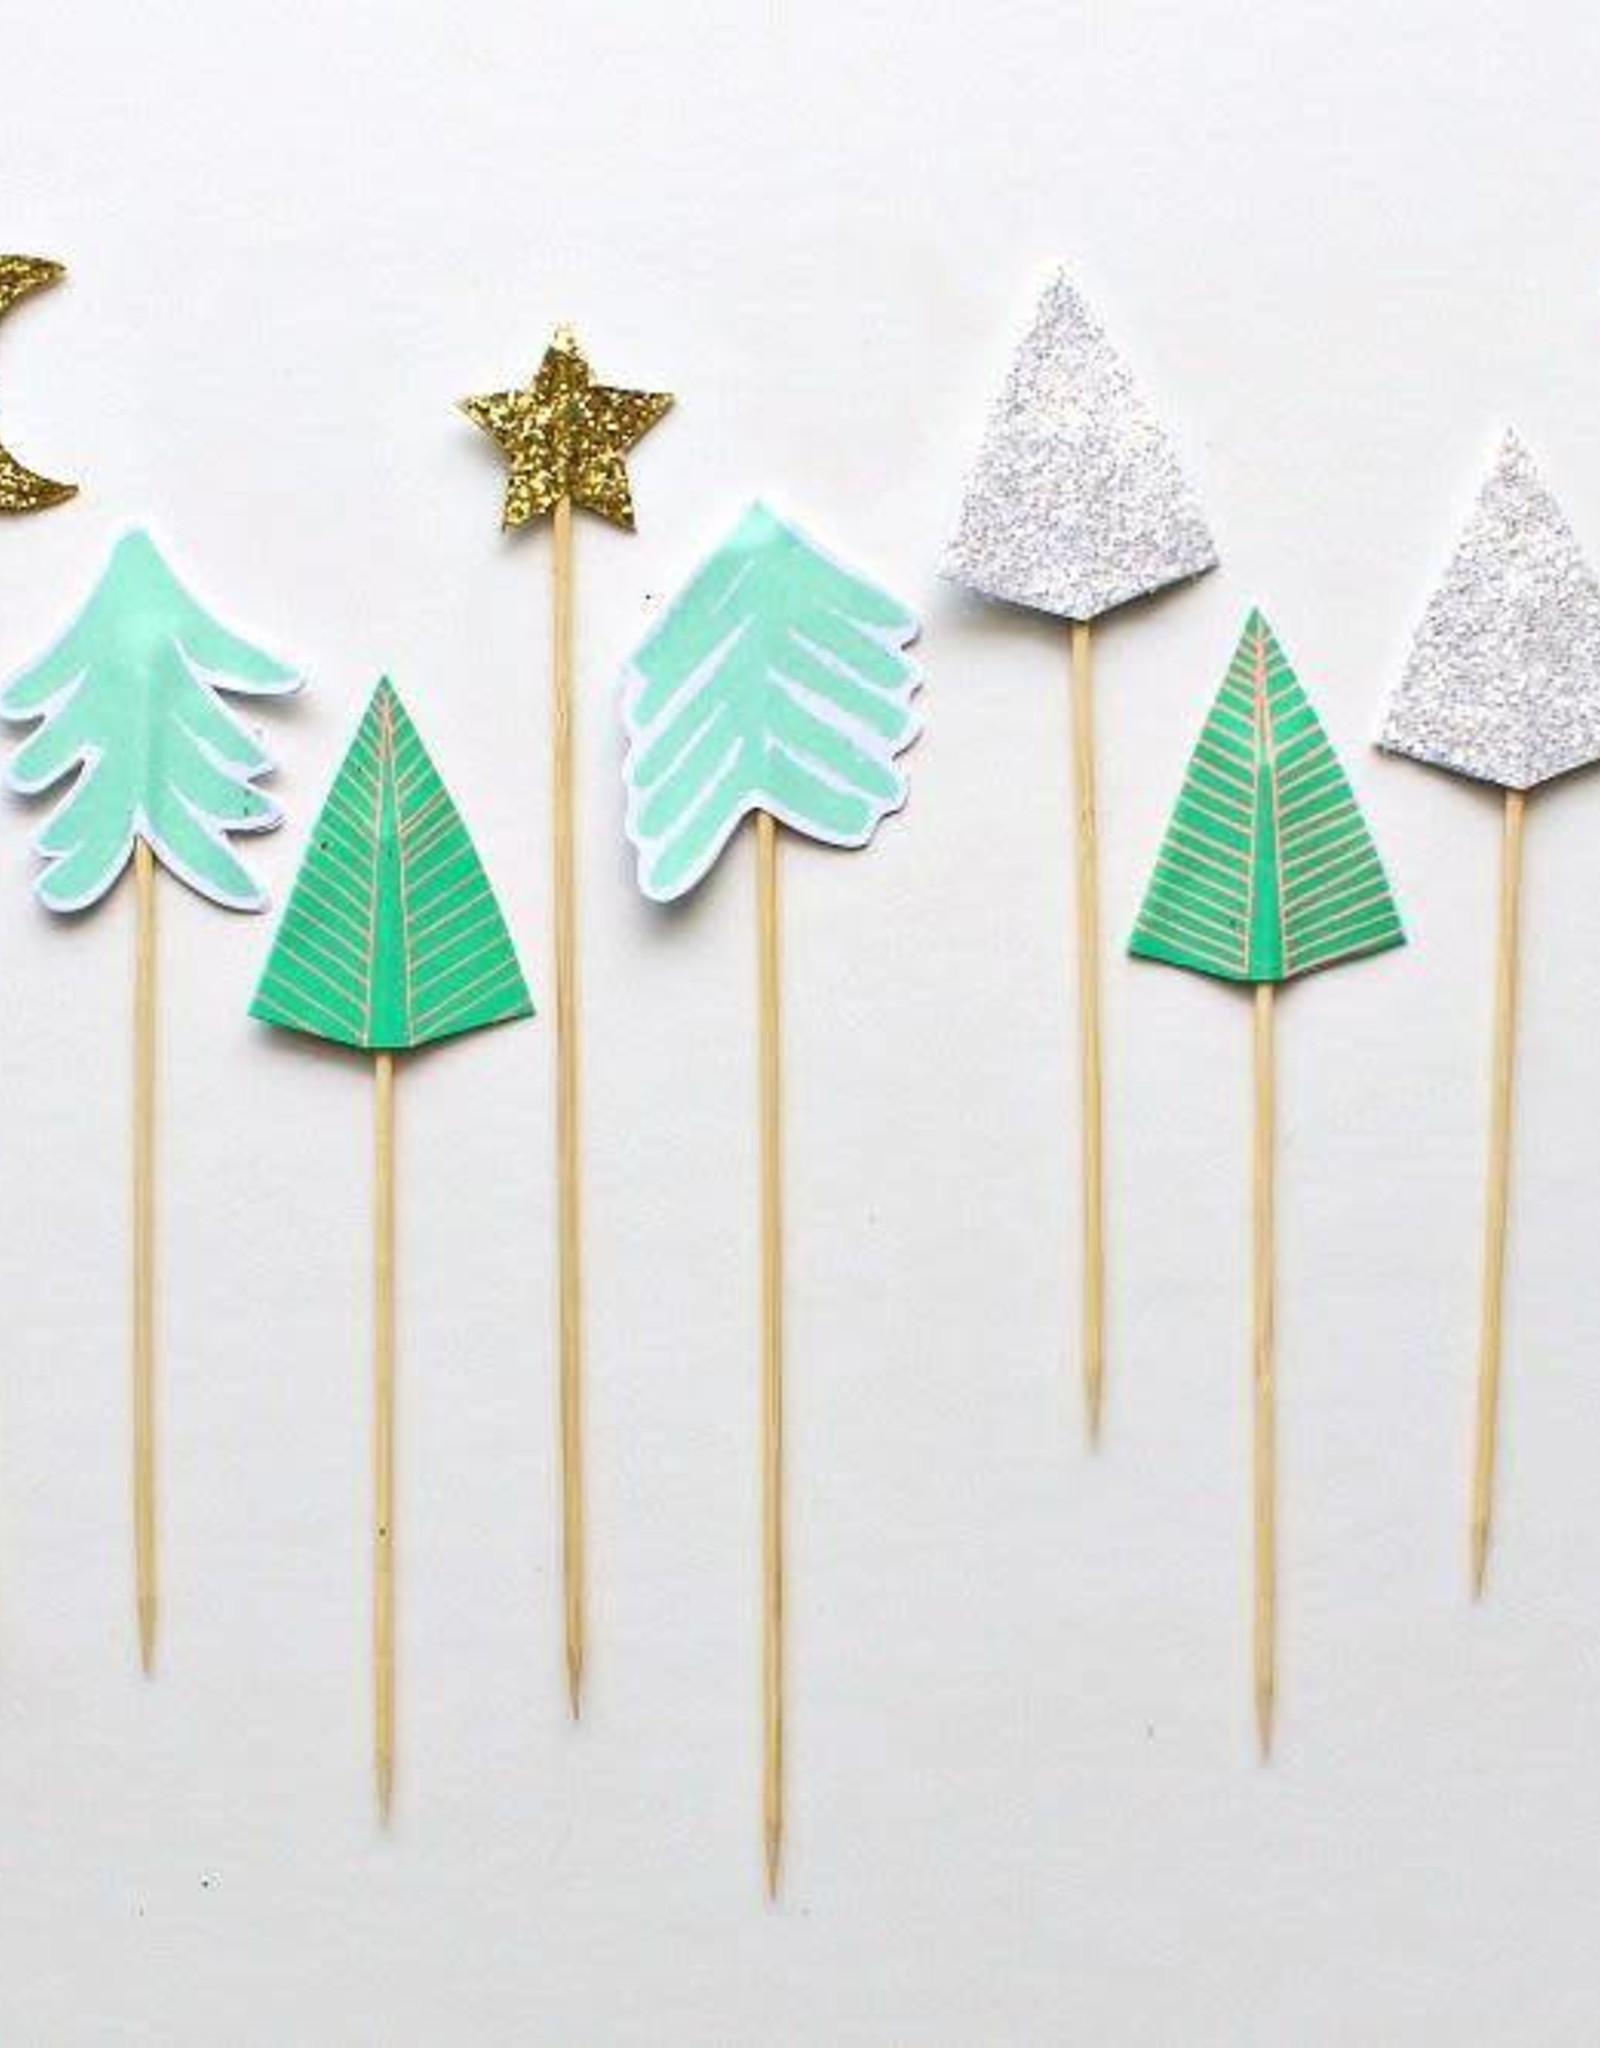 Sparkly Trees Cake Topper